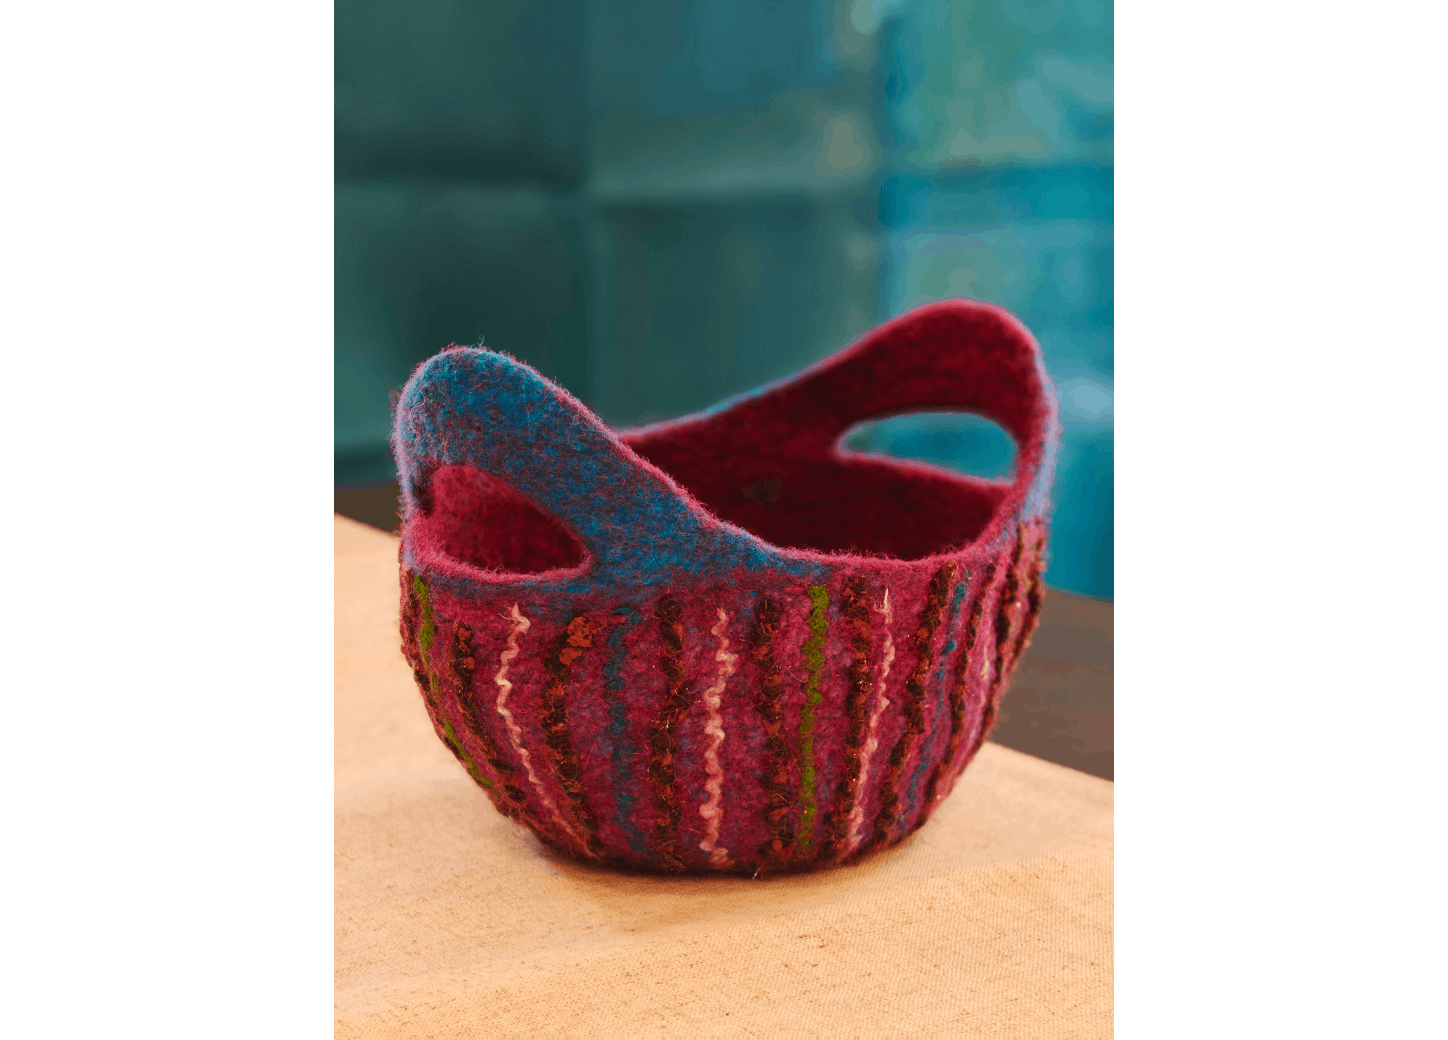 Felted basket on a table